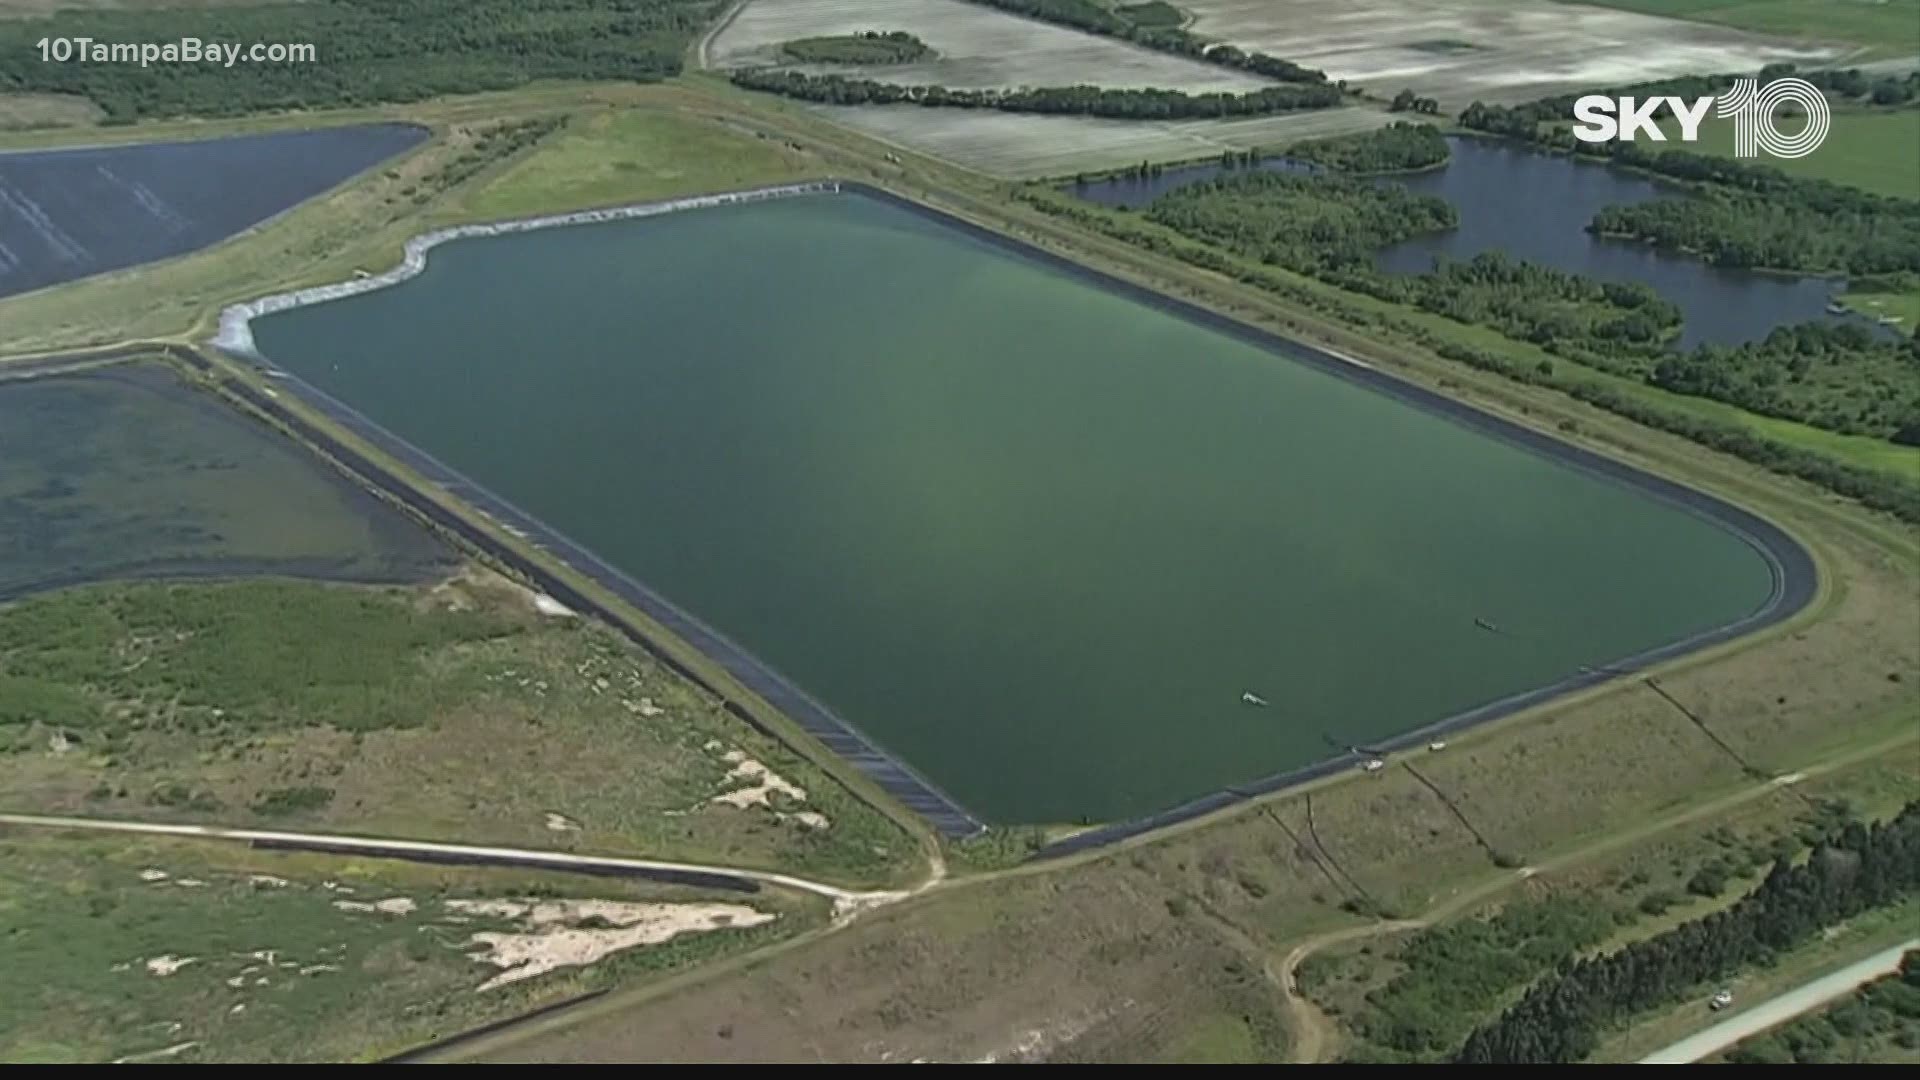 A full breach is possible at a retention pond holding between 700 and 800 million gallons of water, according to the acting county administrator.